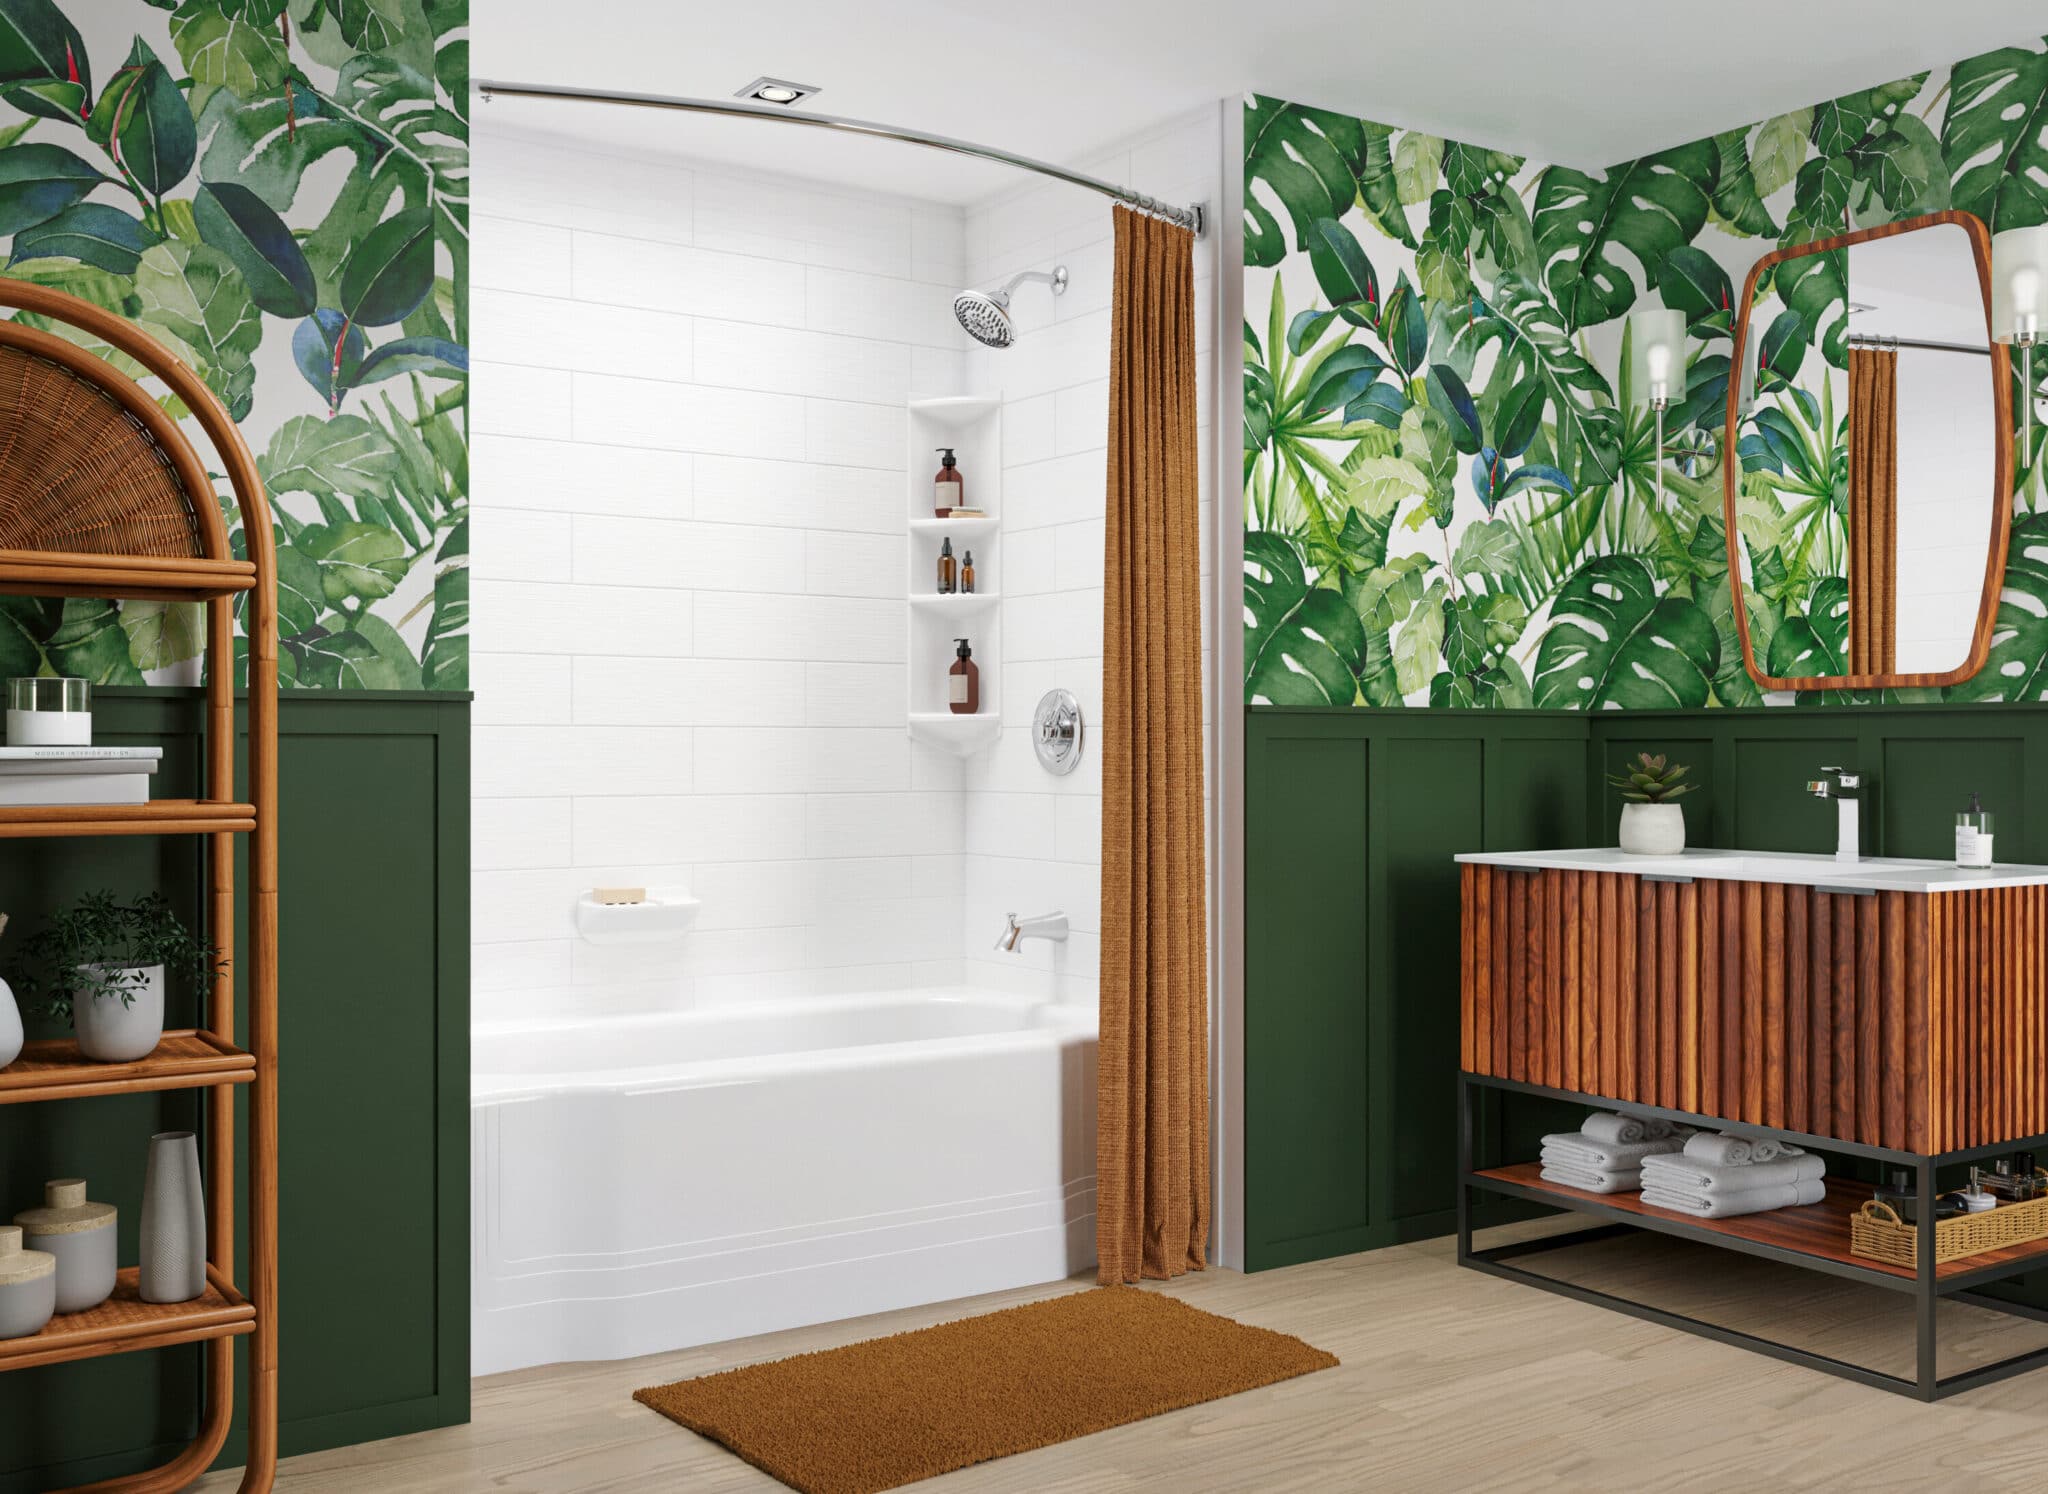 A bathroom with tropical green wallpaper, light brown wood floors, a white built-in bath tub and shower, and a bamboo-wood vanity, with a sink and mirror